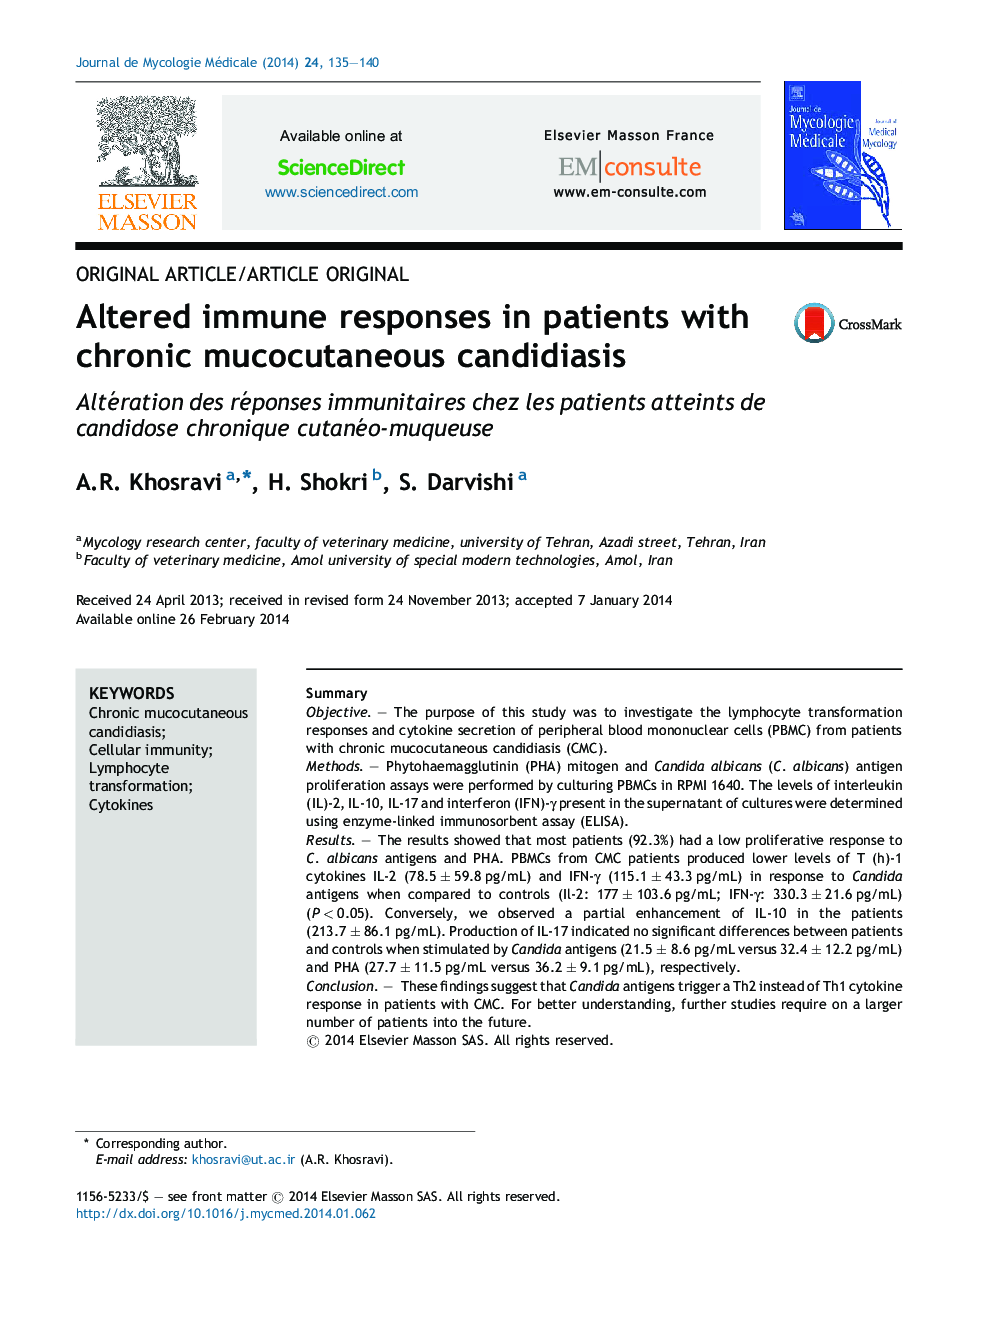 Altered immune responses in patients with chronic mucocutaneous candidiasis